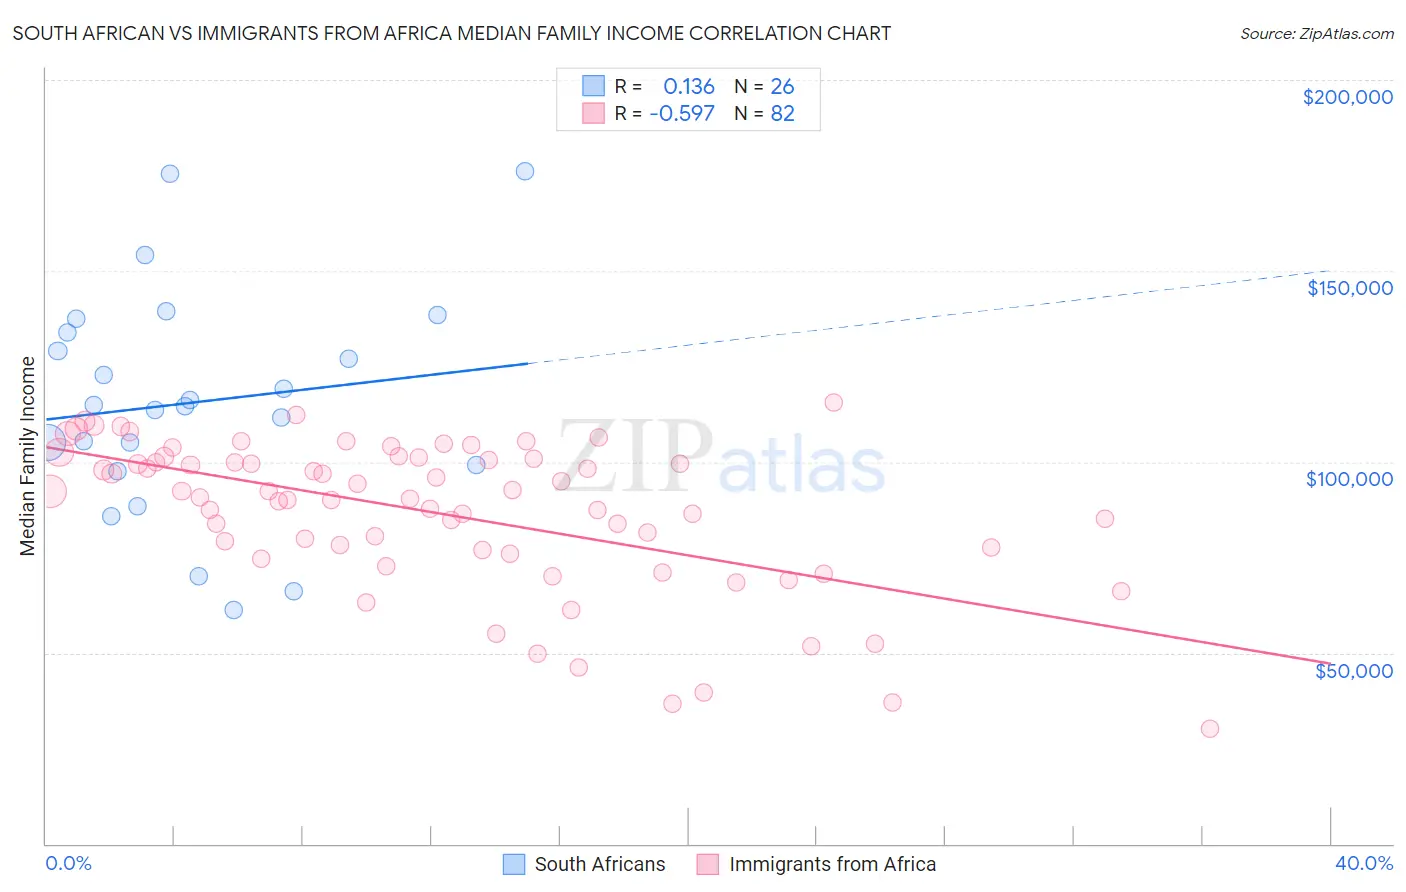 South African vs Immigrants from Africa Median Family Income